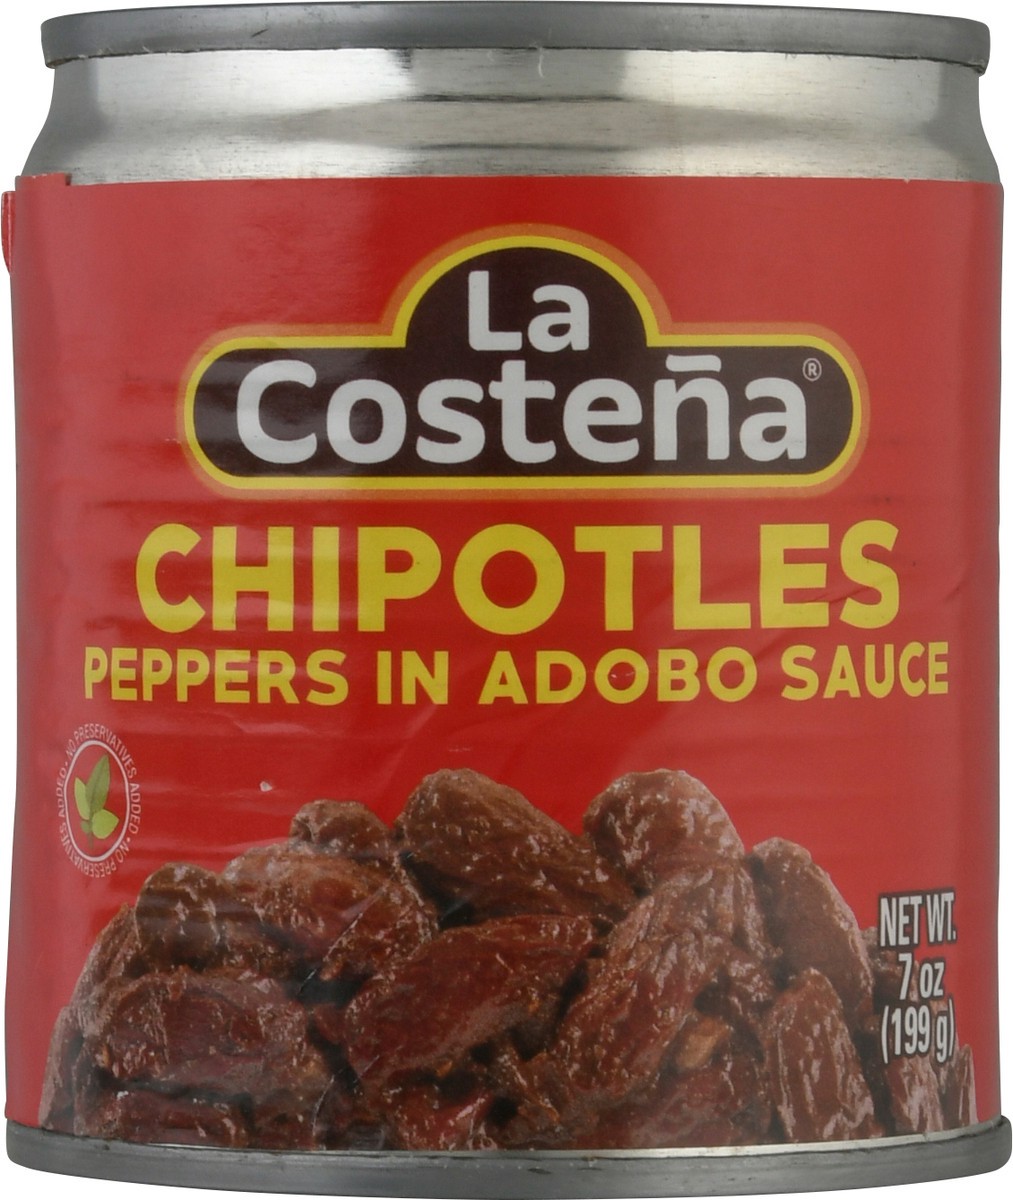 slide 12 of 12, La Costeña Chipotle Peppers in Adobo Sauce, 7 oz